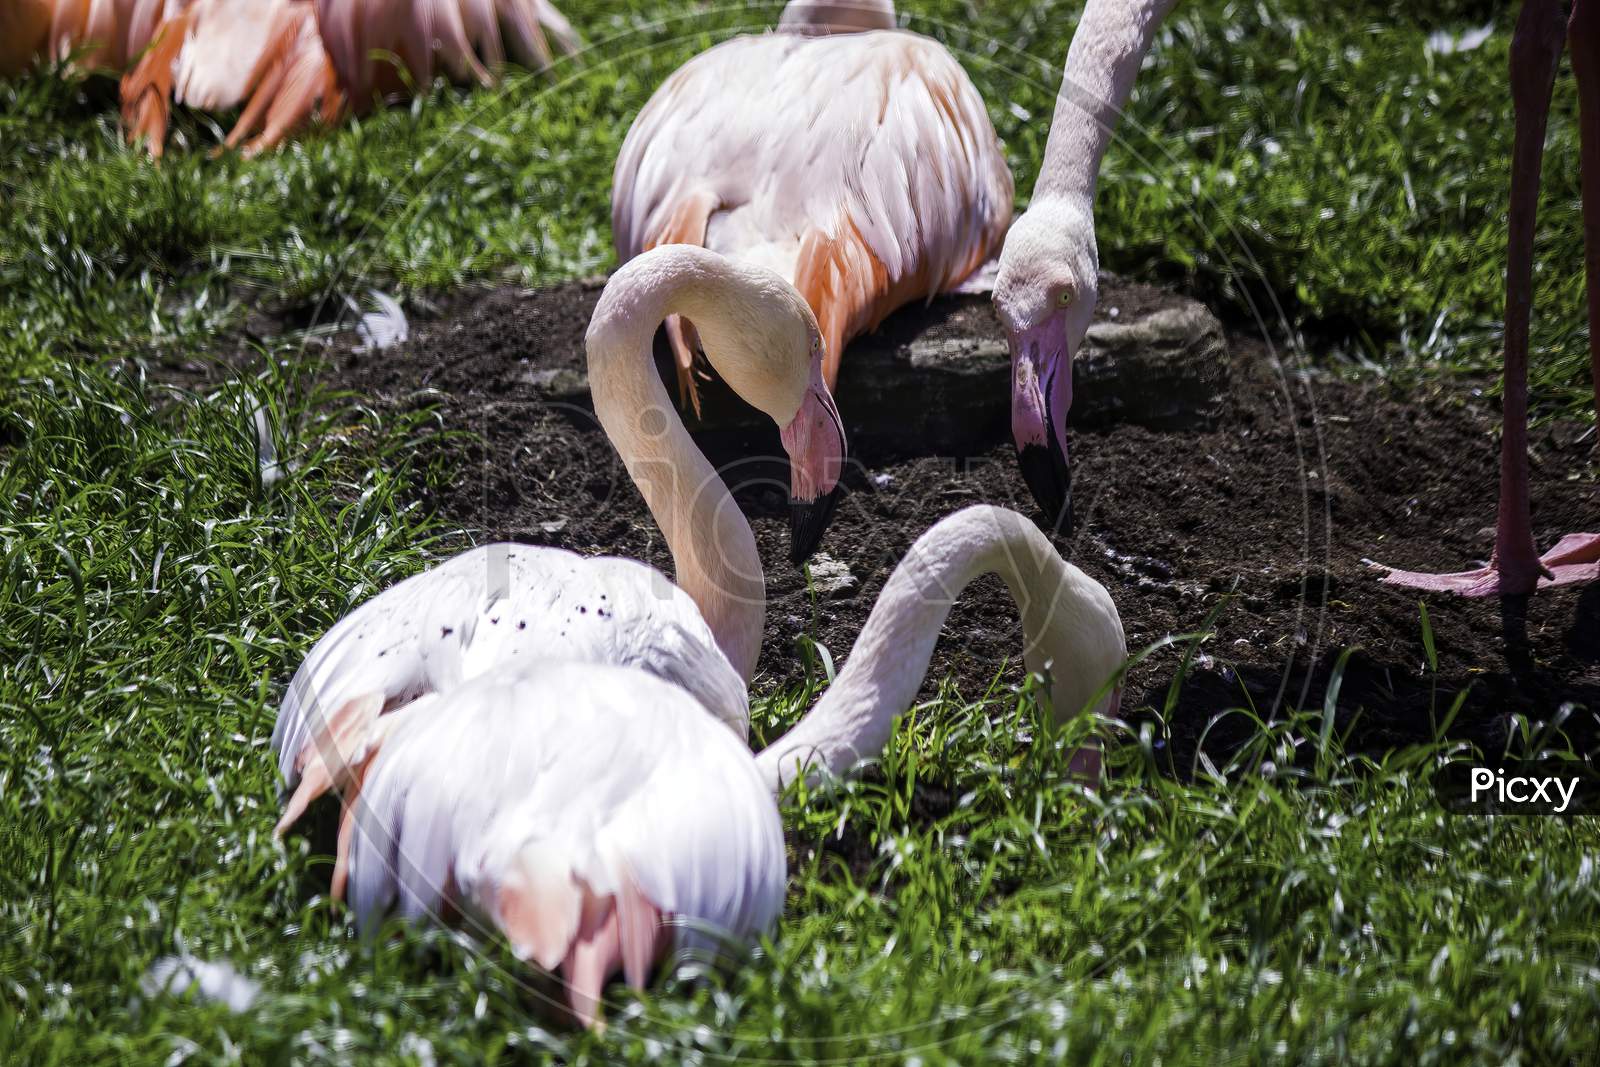 Bunch Of White Greater Flamingo, A Species Of Flamingos Sitting Together In A Park In Krakow City, Poland - Europe